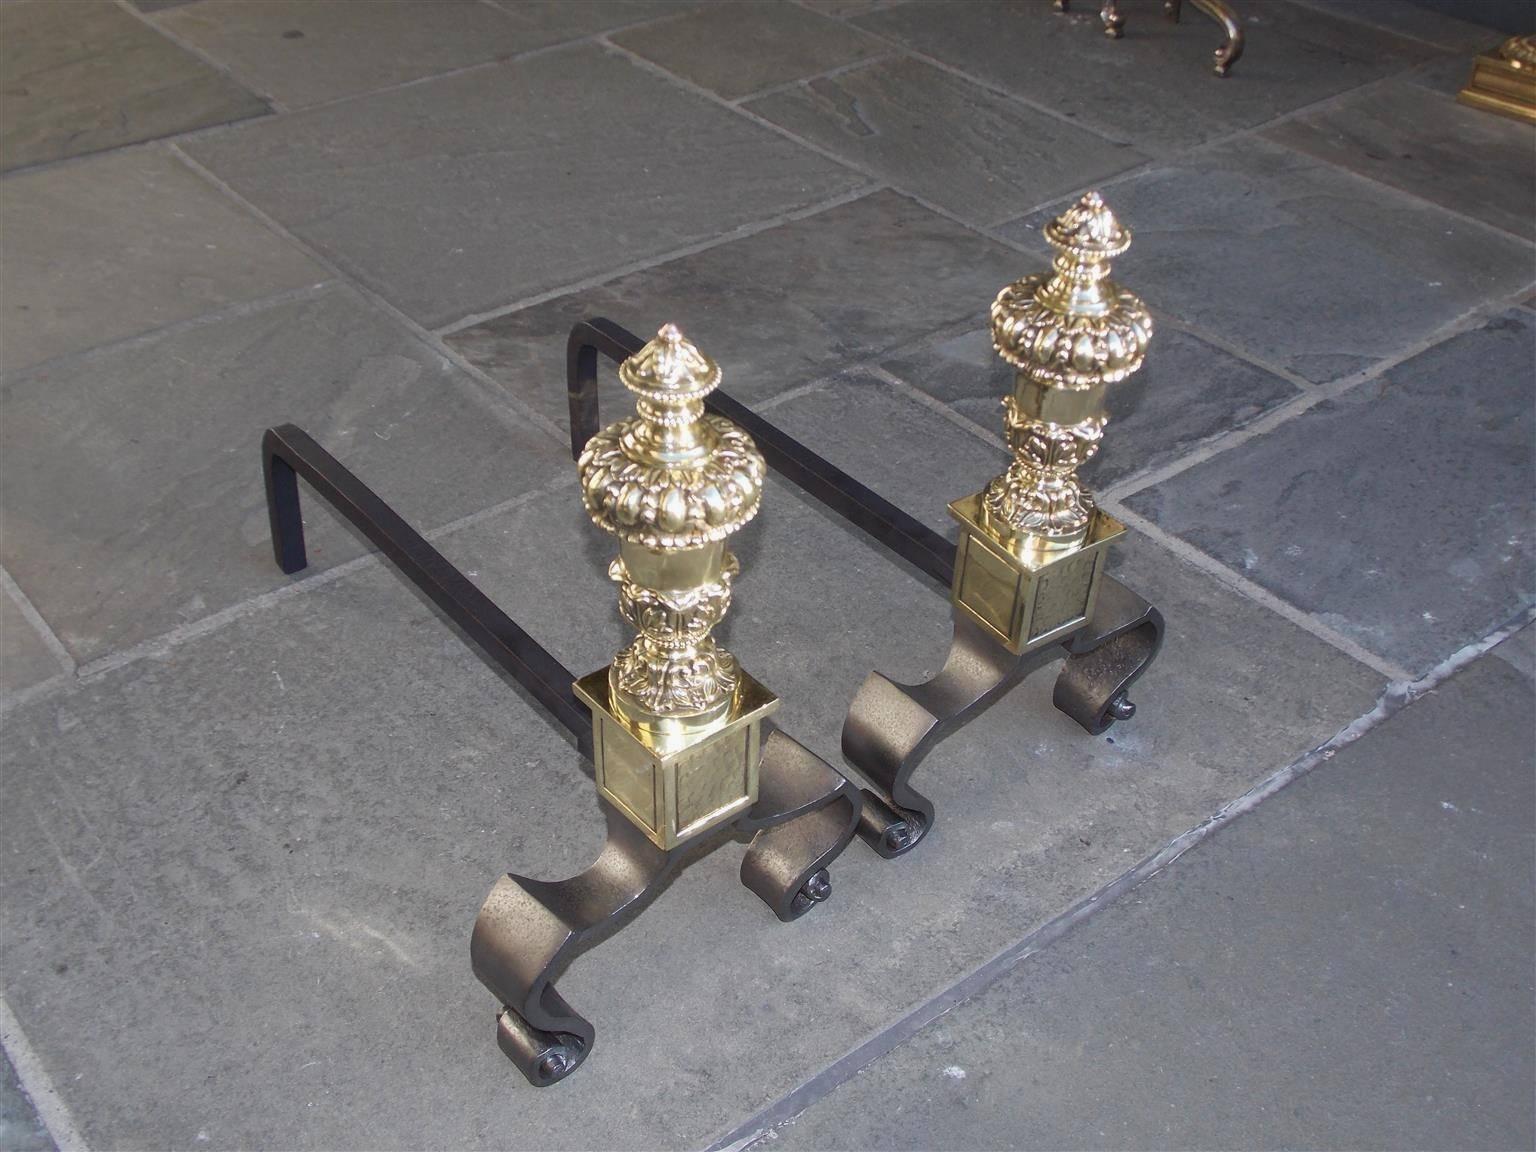 Pair of French brass and polished steel Urn finial andirons with decorative acanthus bead work, squared hand hammered plinths, and resting on outset flanking scrolled legs, Mid-19th century. Depth can be adjusted if desired at no additional cost.